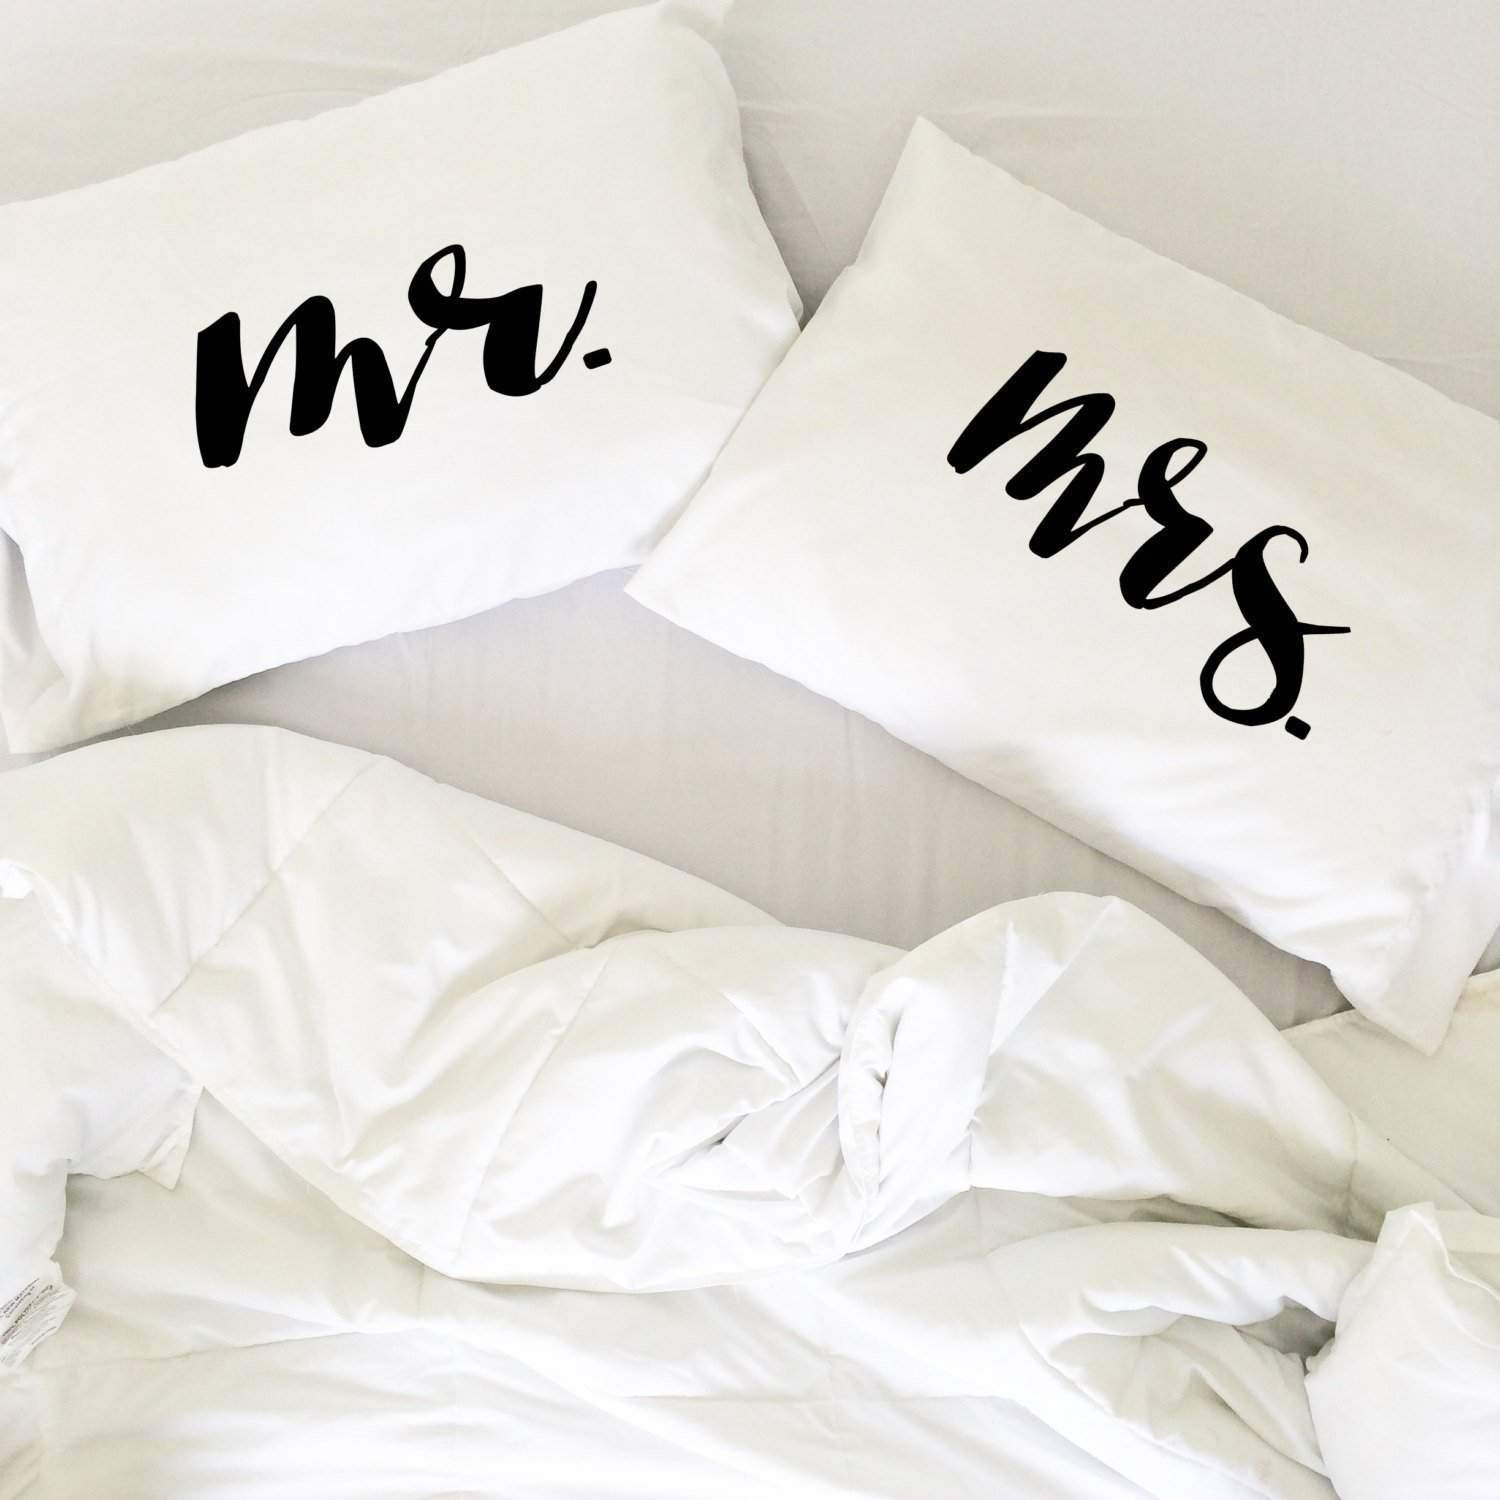 Christmas Gift Ideas For A Couple That Has Everything
 Top 30 Best Christmas Gifts for Couples